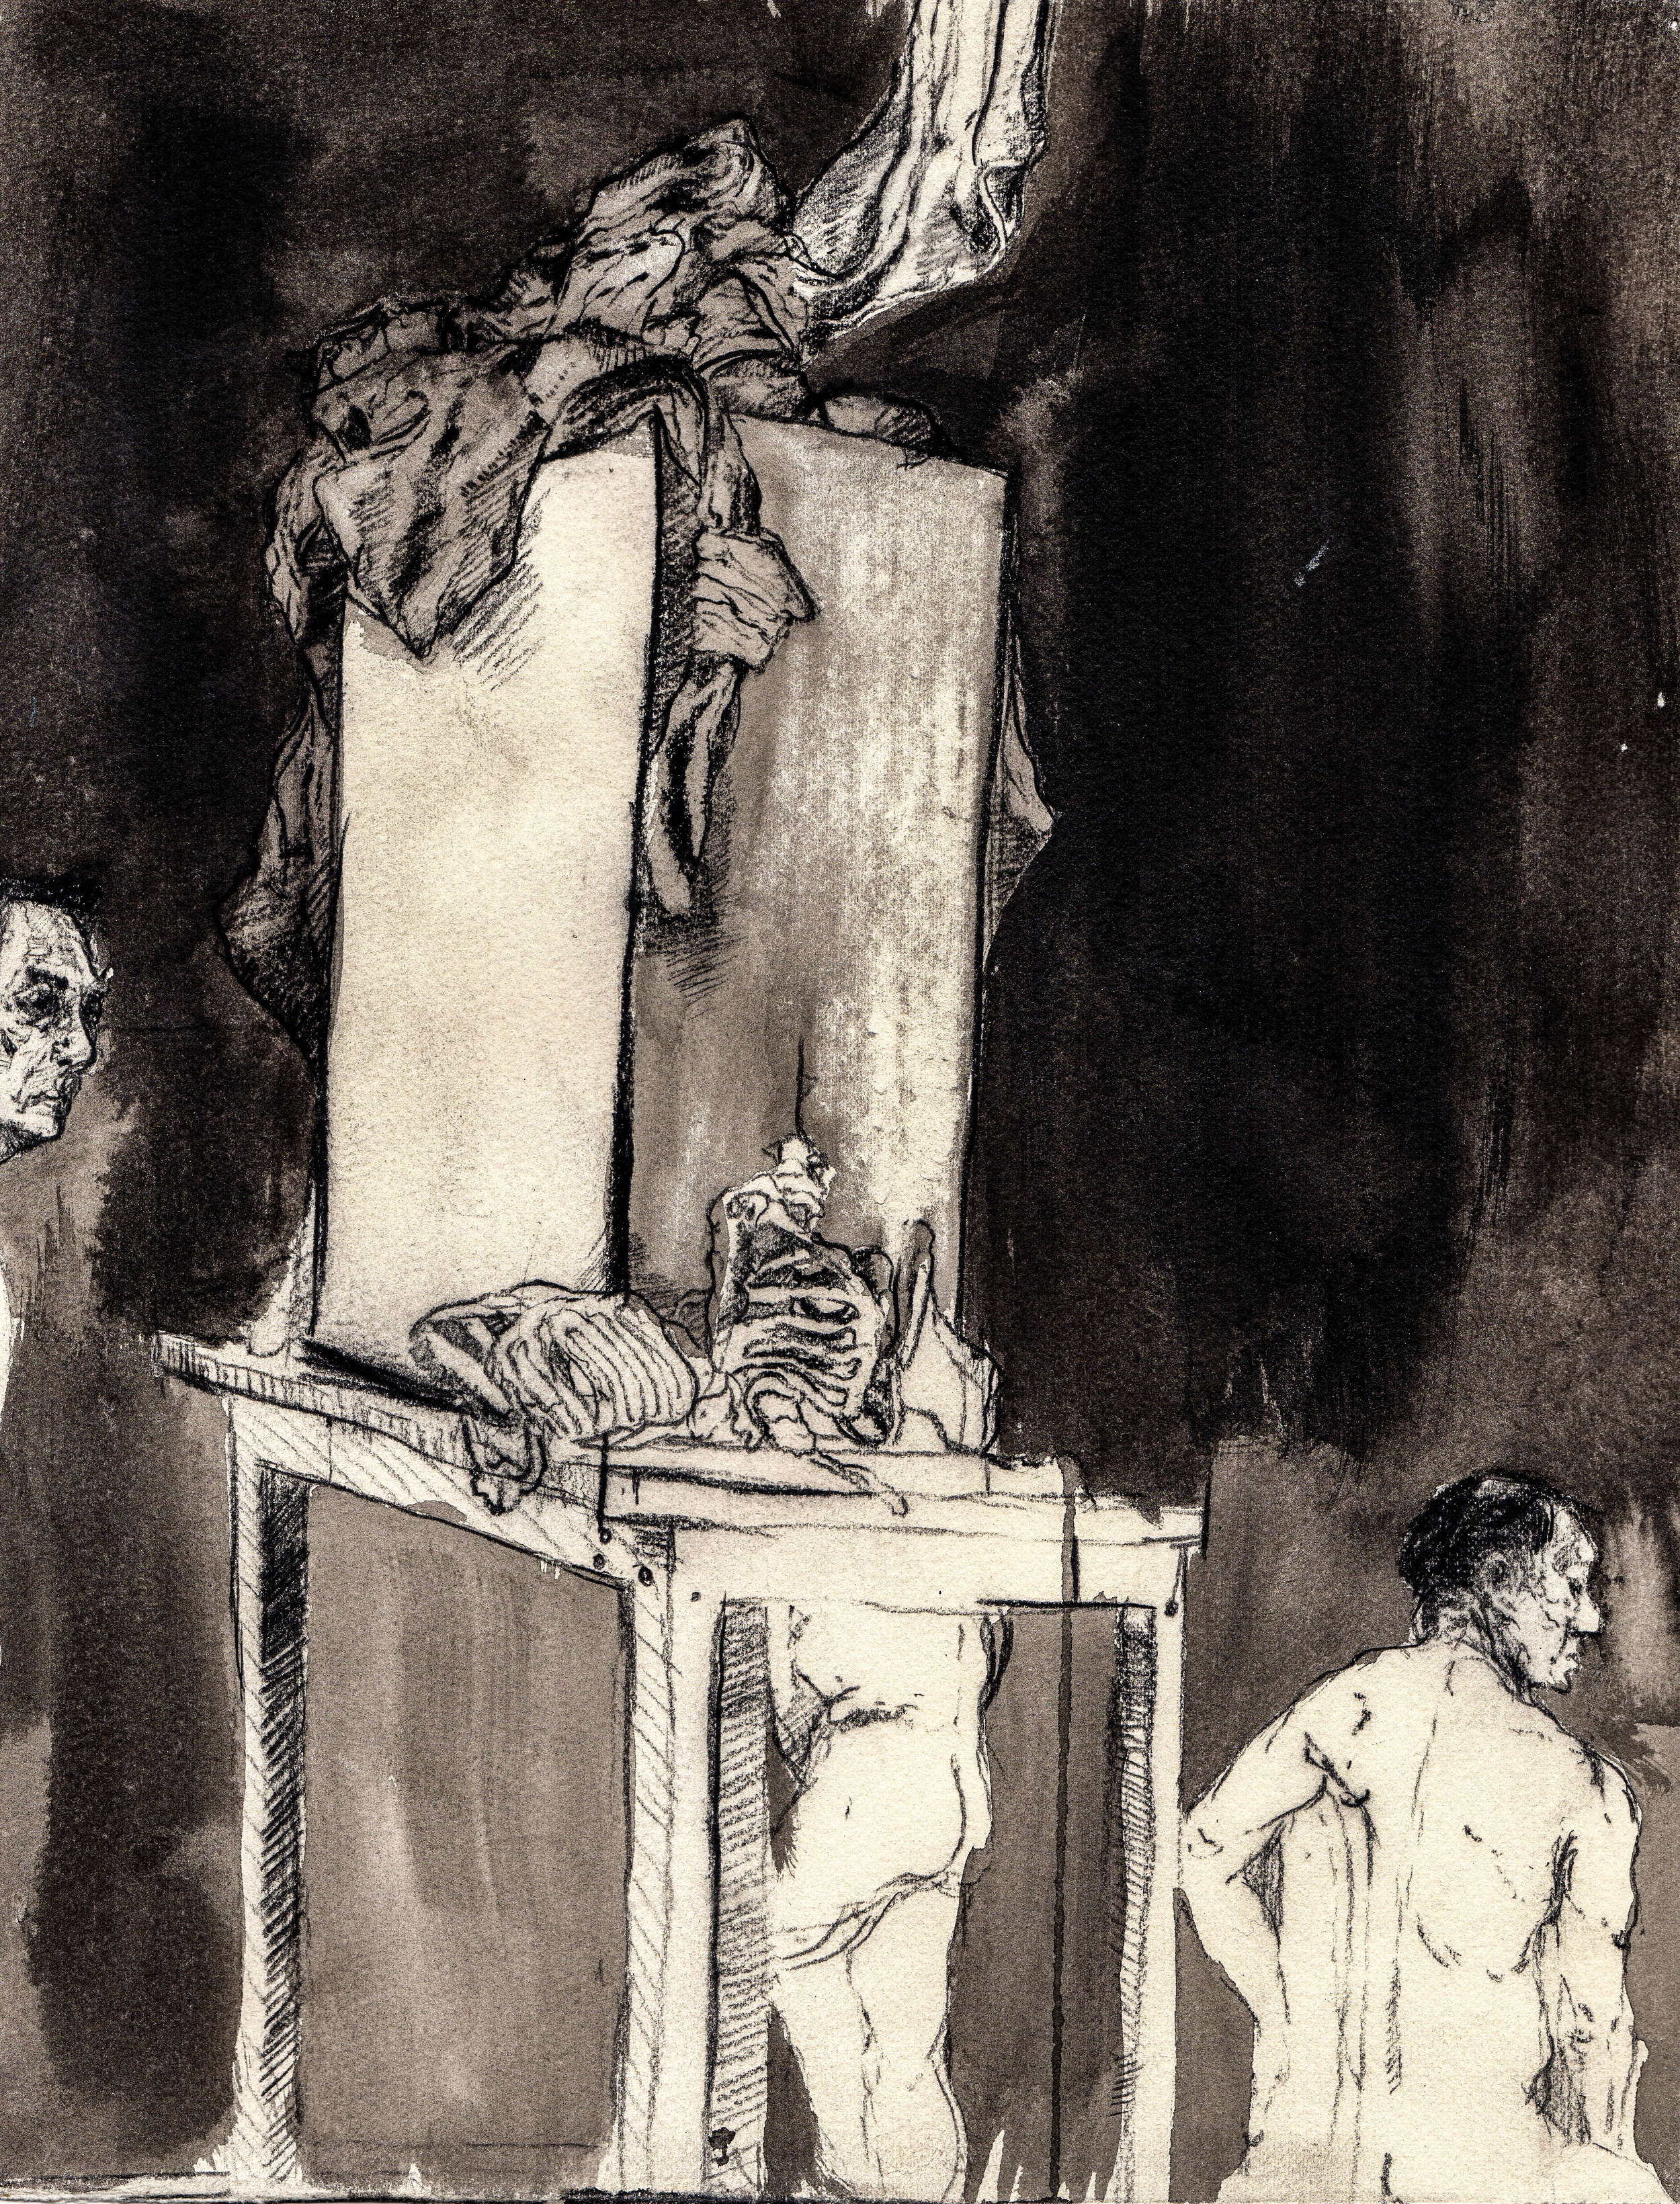    Guards 'round the slab.  &nbsp;2013. 11 x 13 inches. Ink wash on paper. 